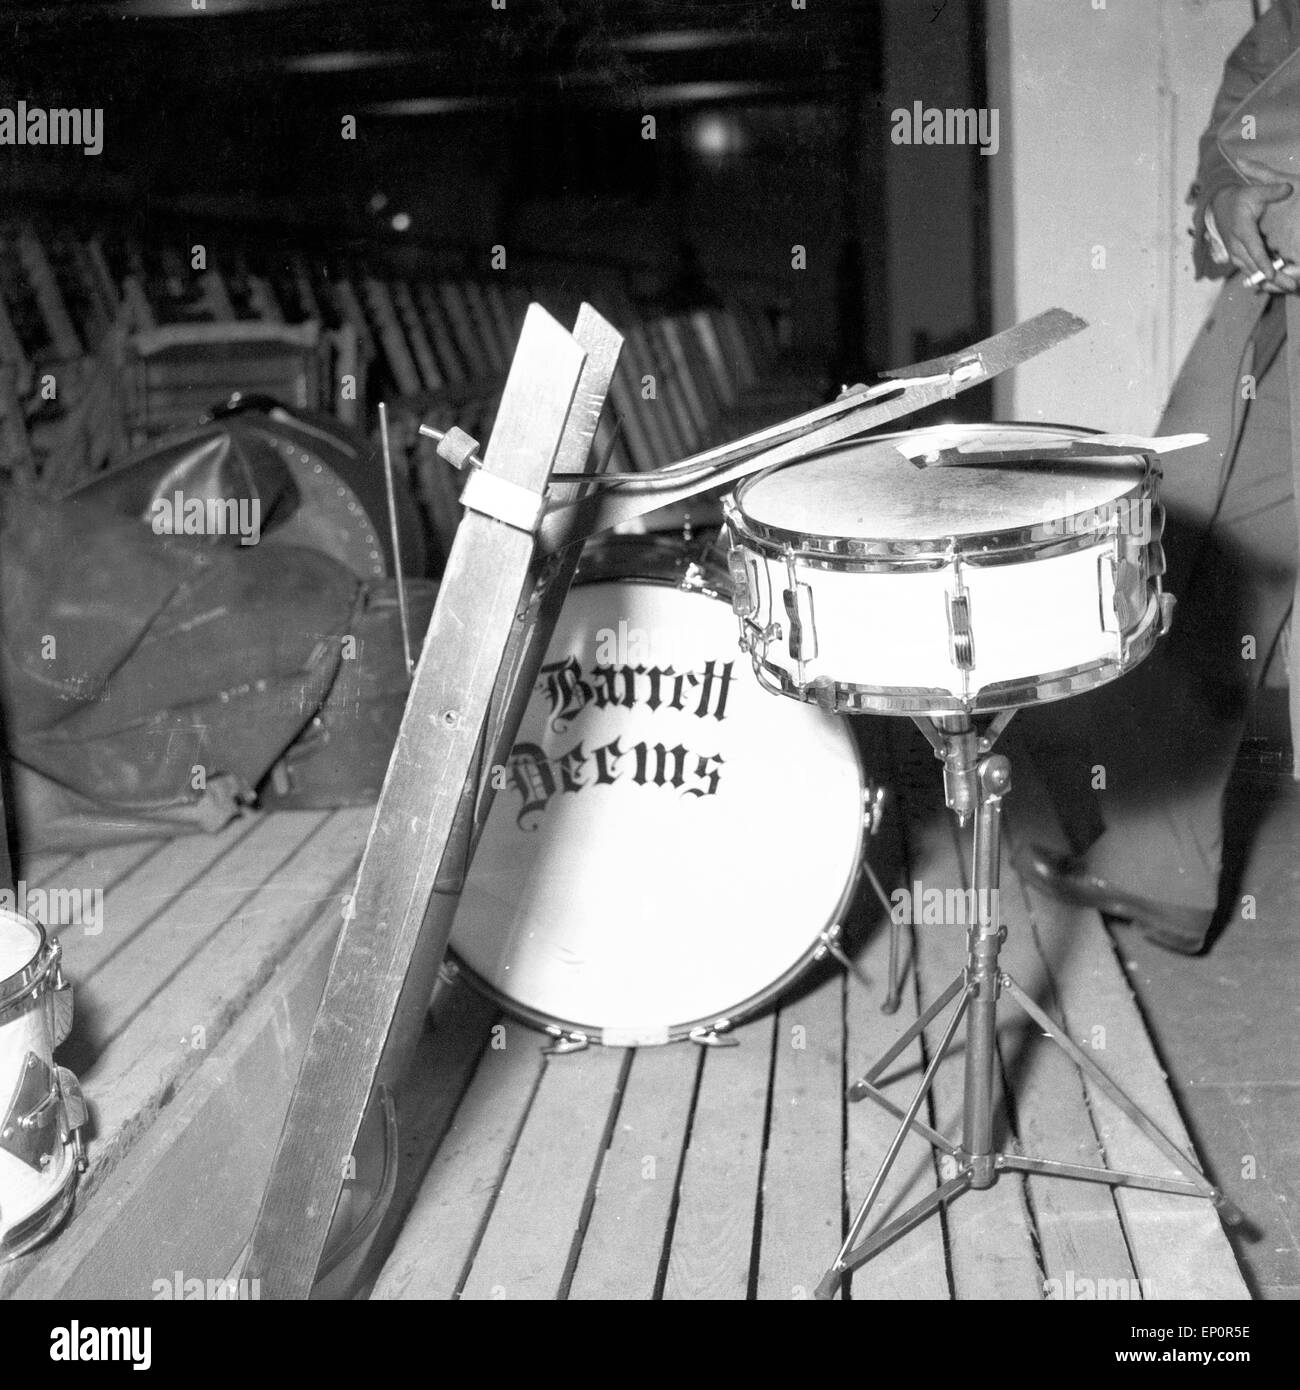 Drum set Black and White Stock Photos & Images - Alamy